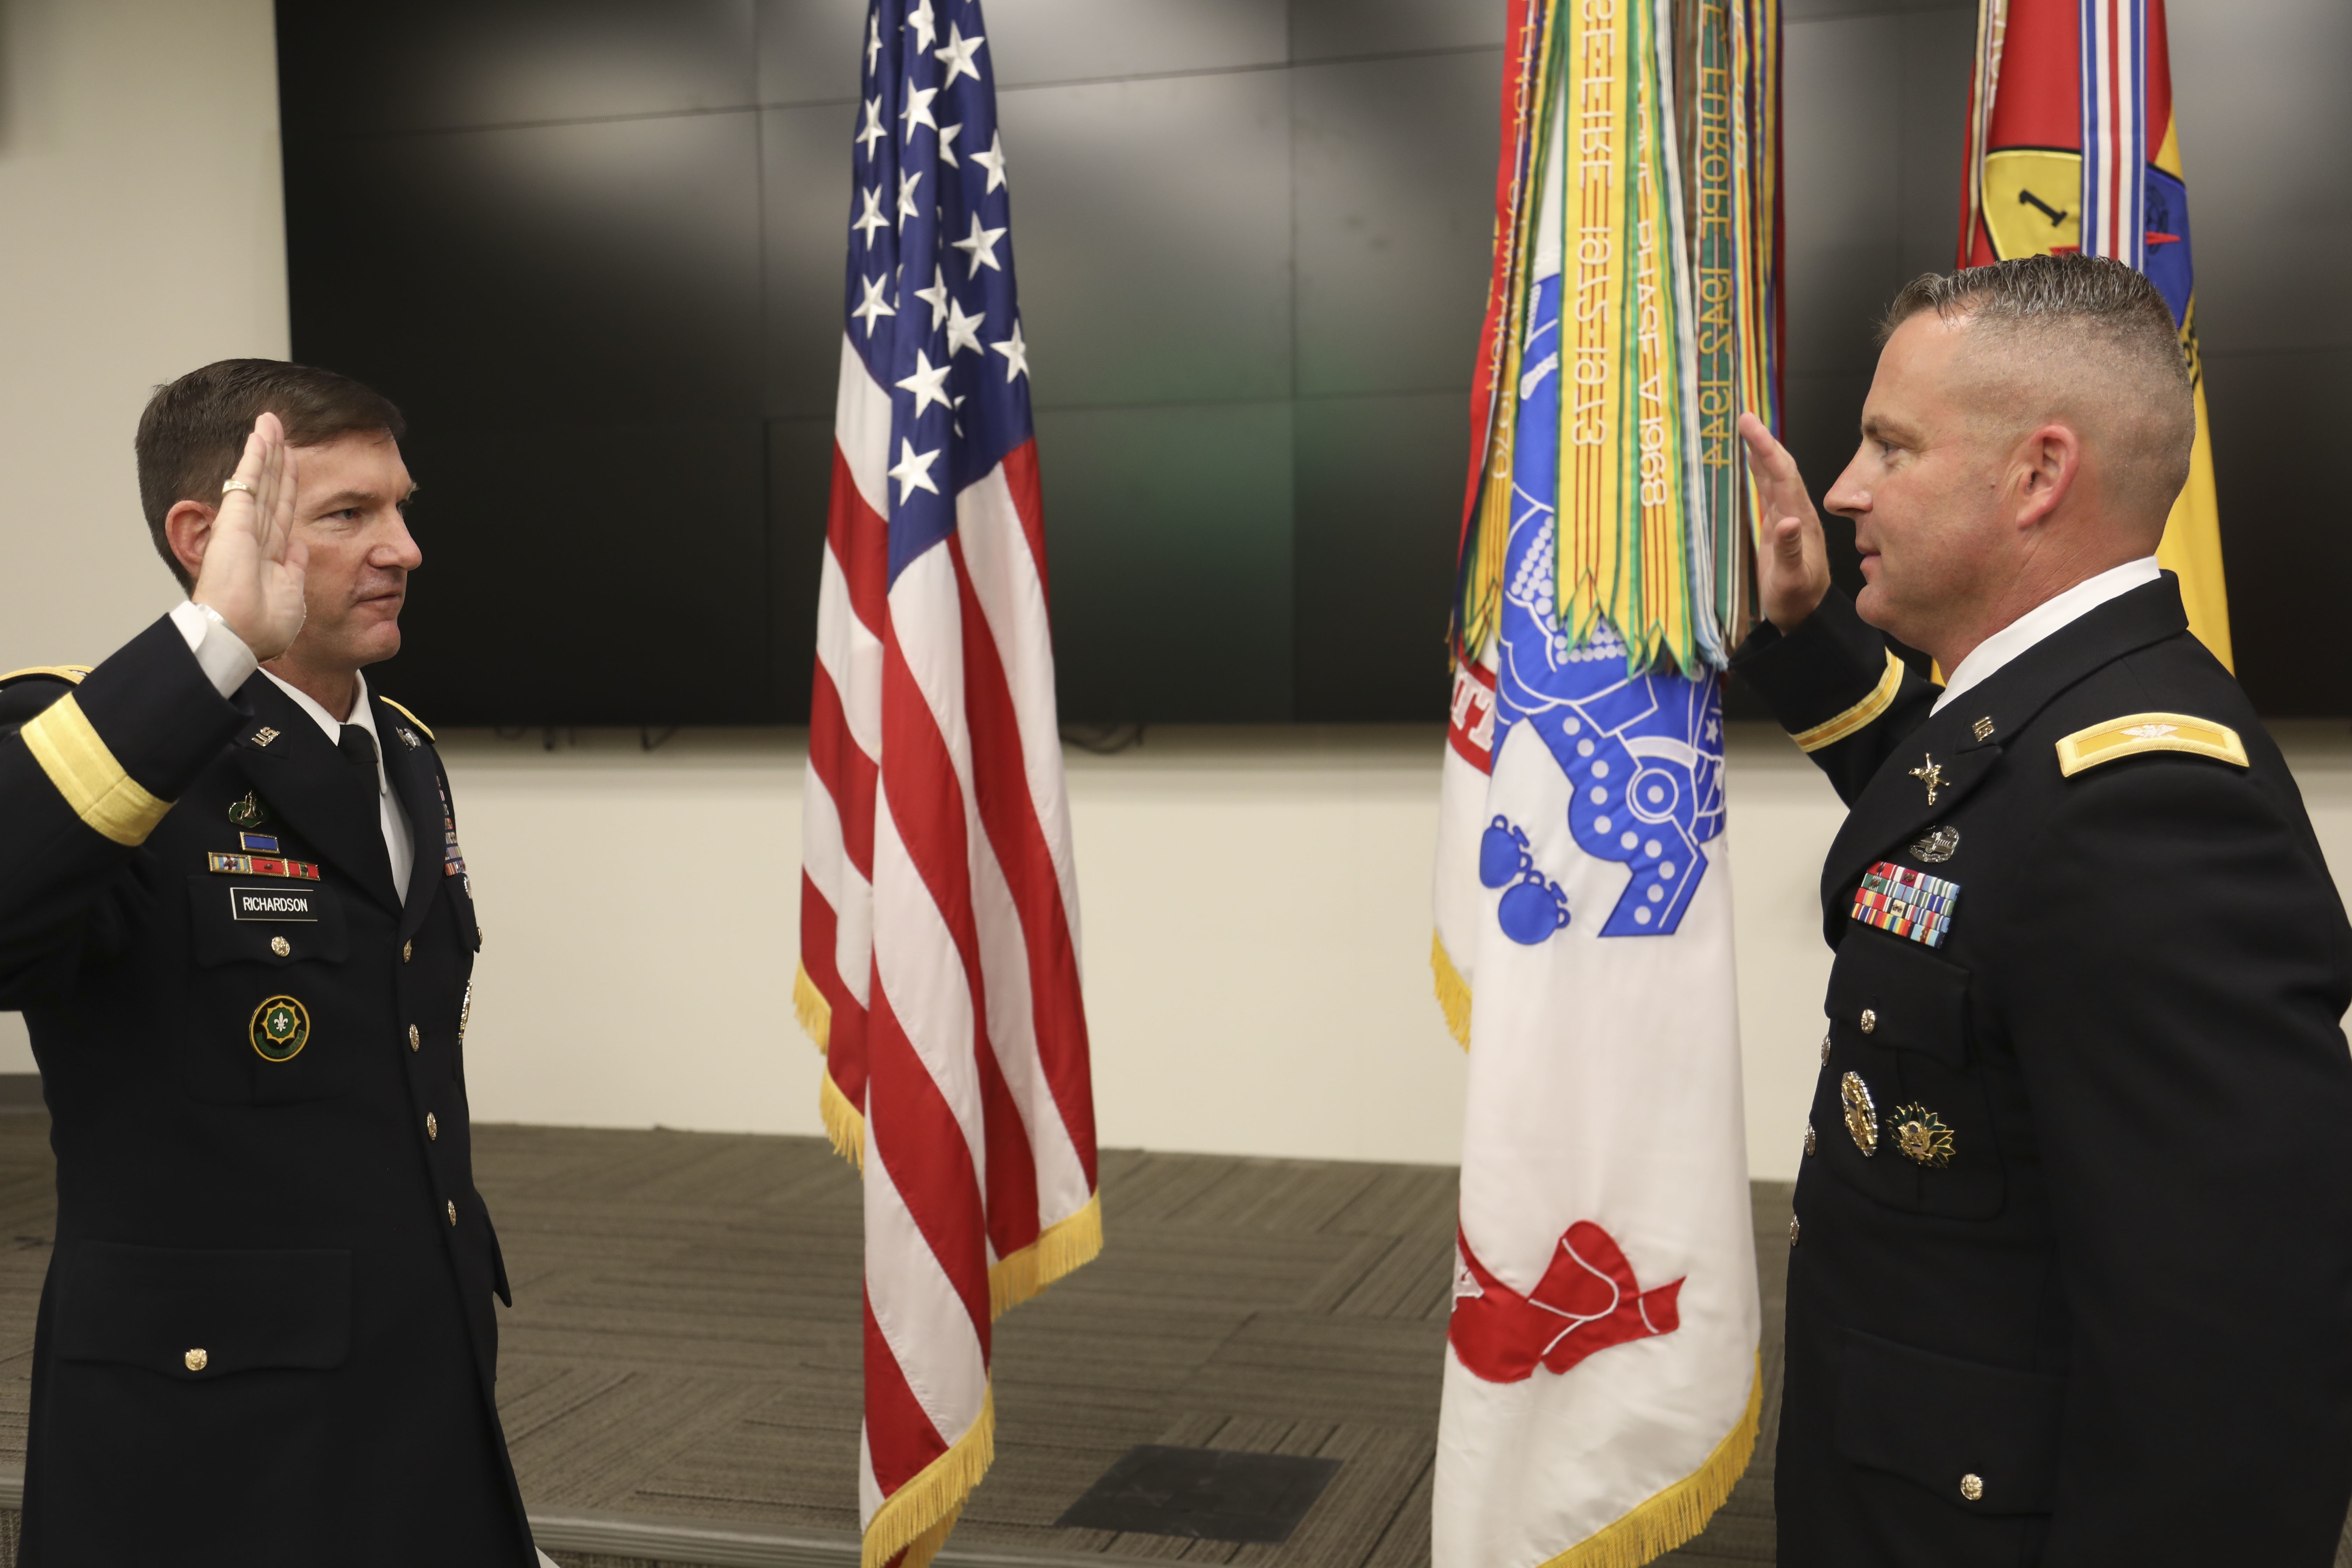 1AD Officer selected for Brevet Promotion Article The United States